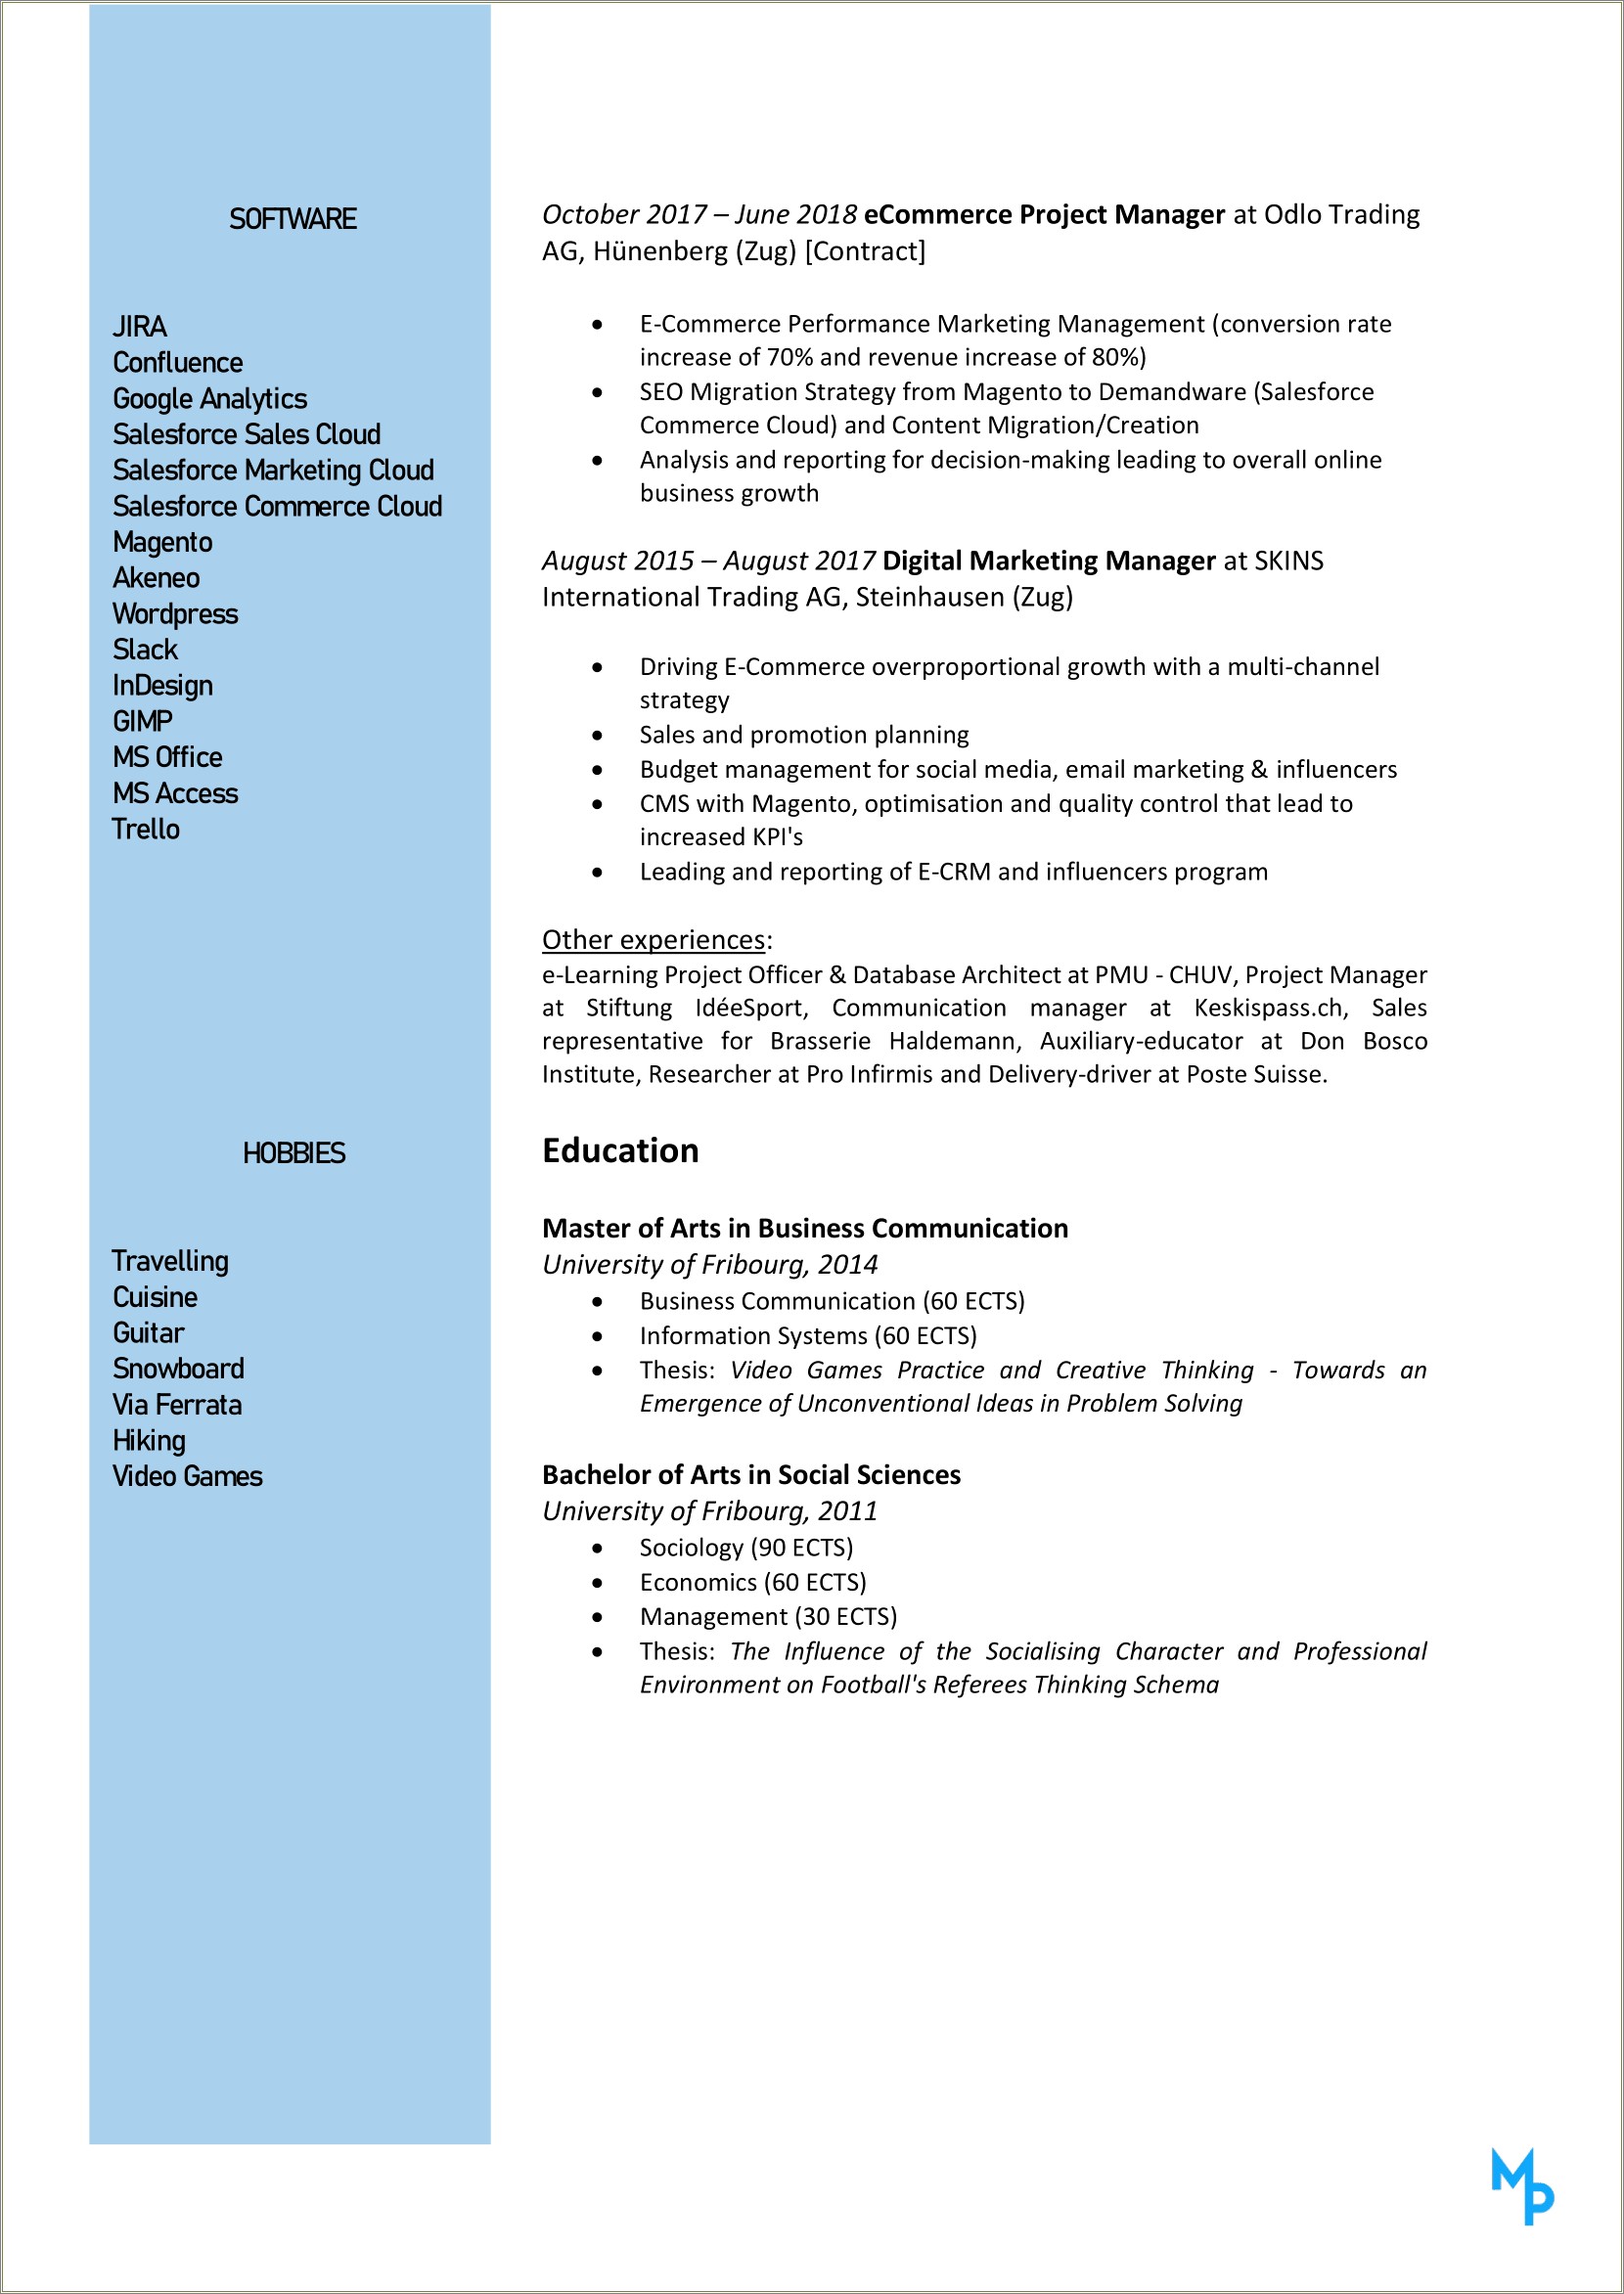 Description For Sales And Trading On Resume